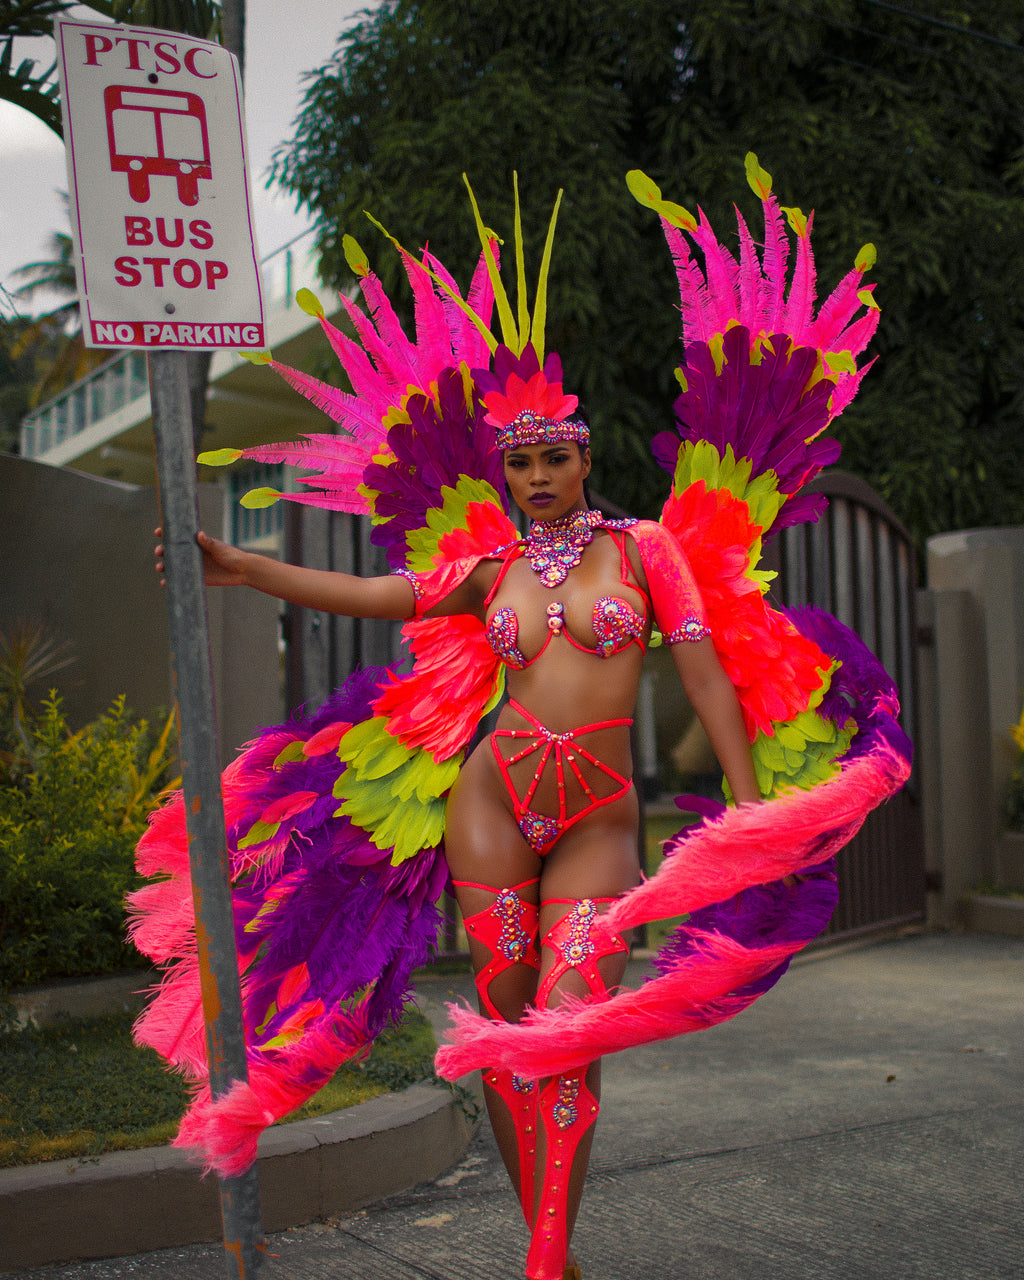 Carnival costume and swimwear supplies retail store based in Trinidad.